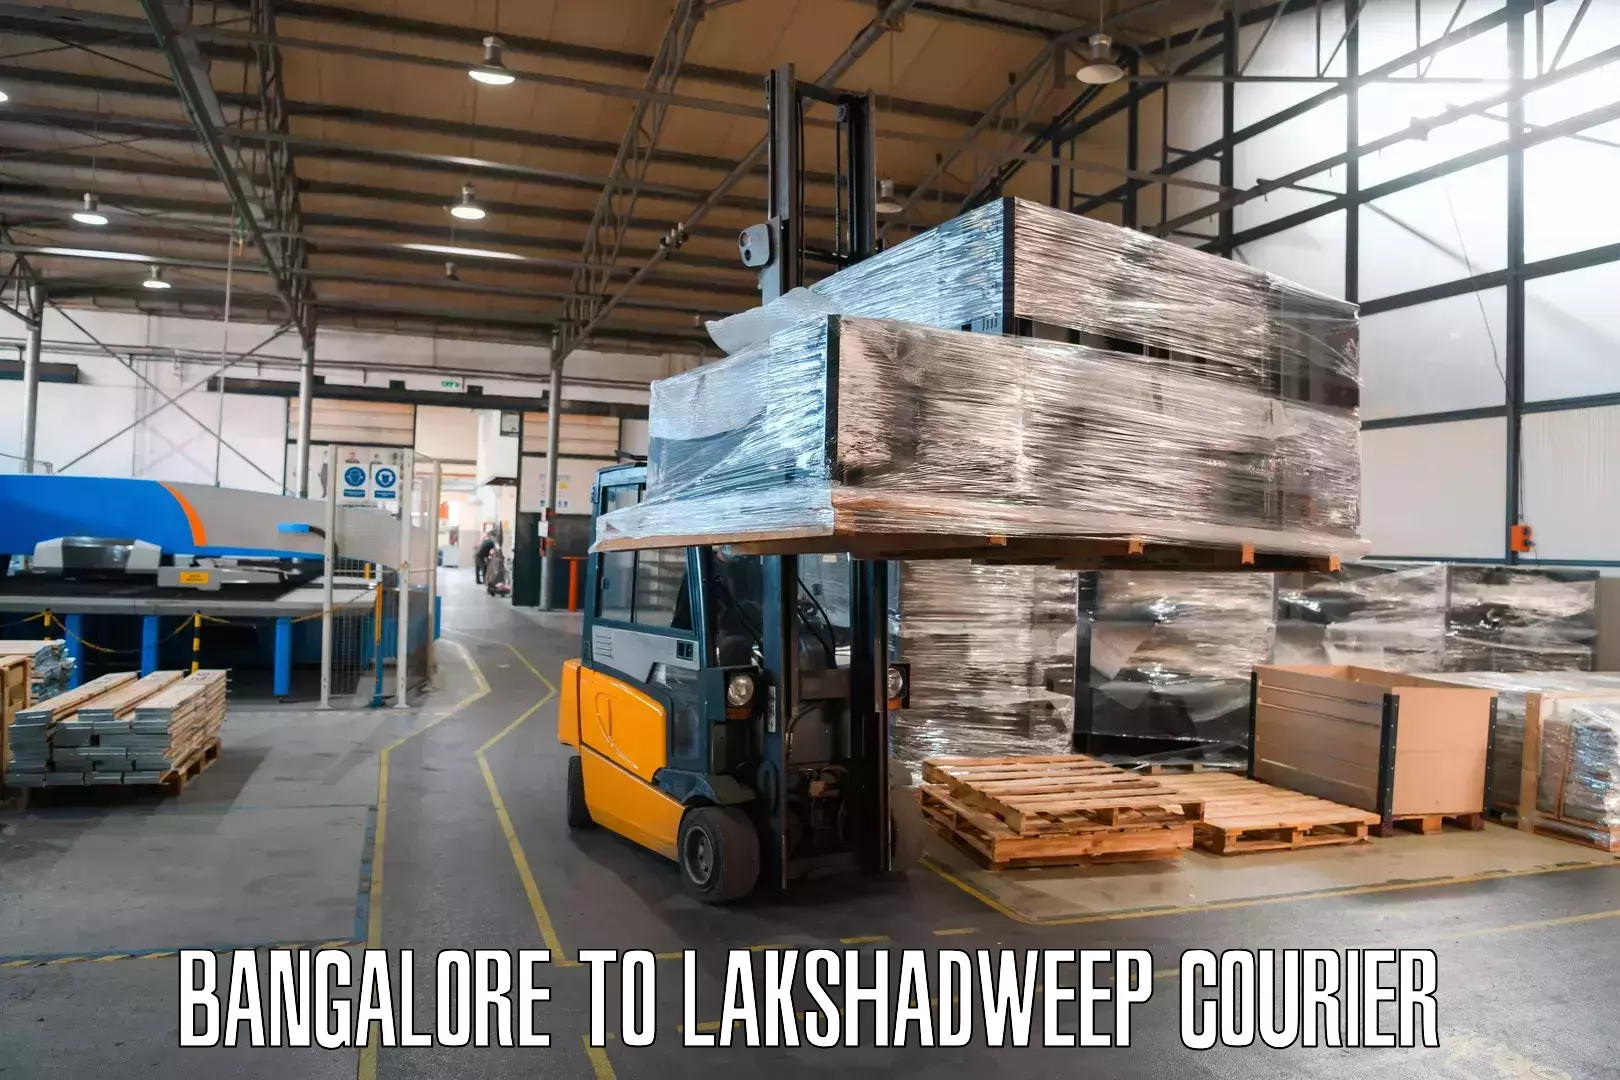 Nationwide courier service Bangalore to Lakshadweep